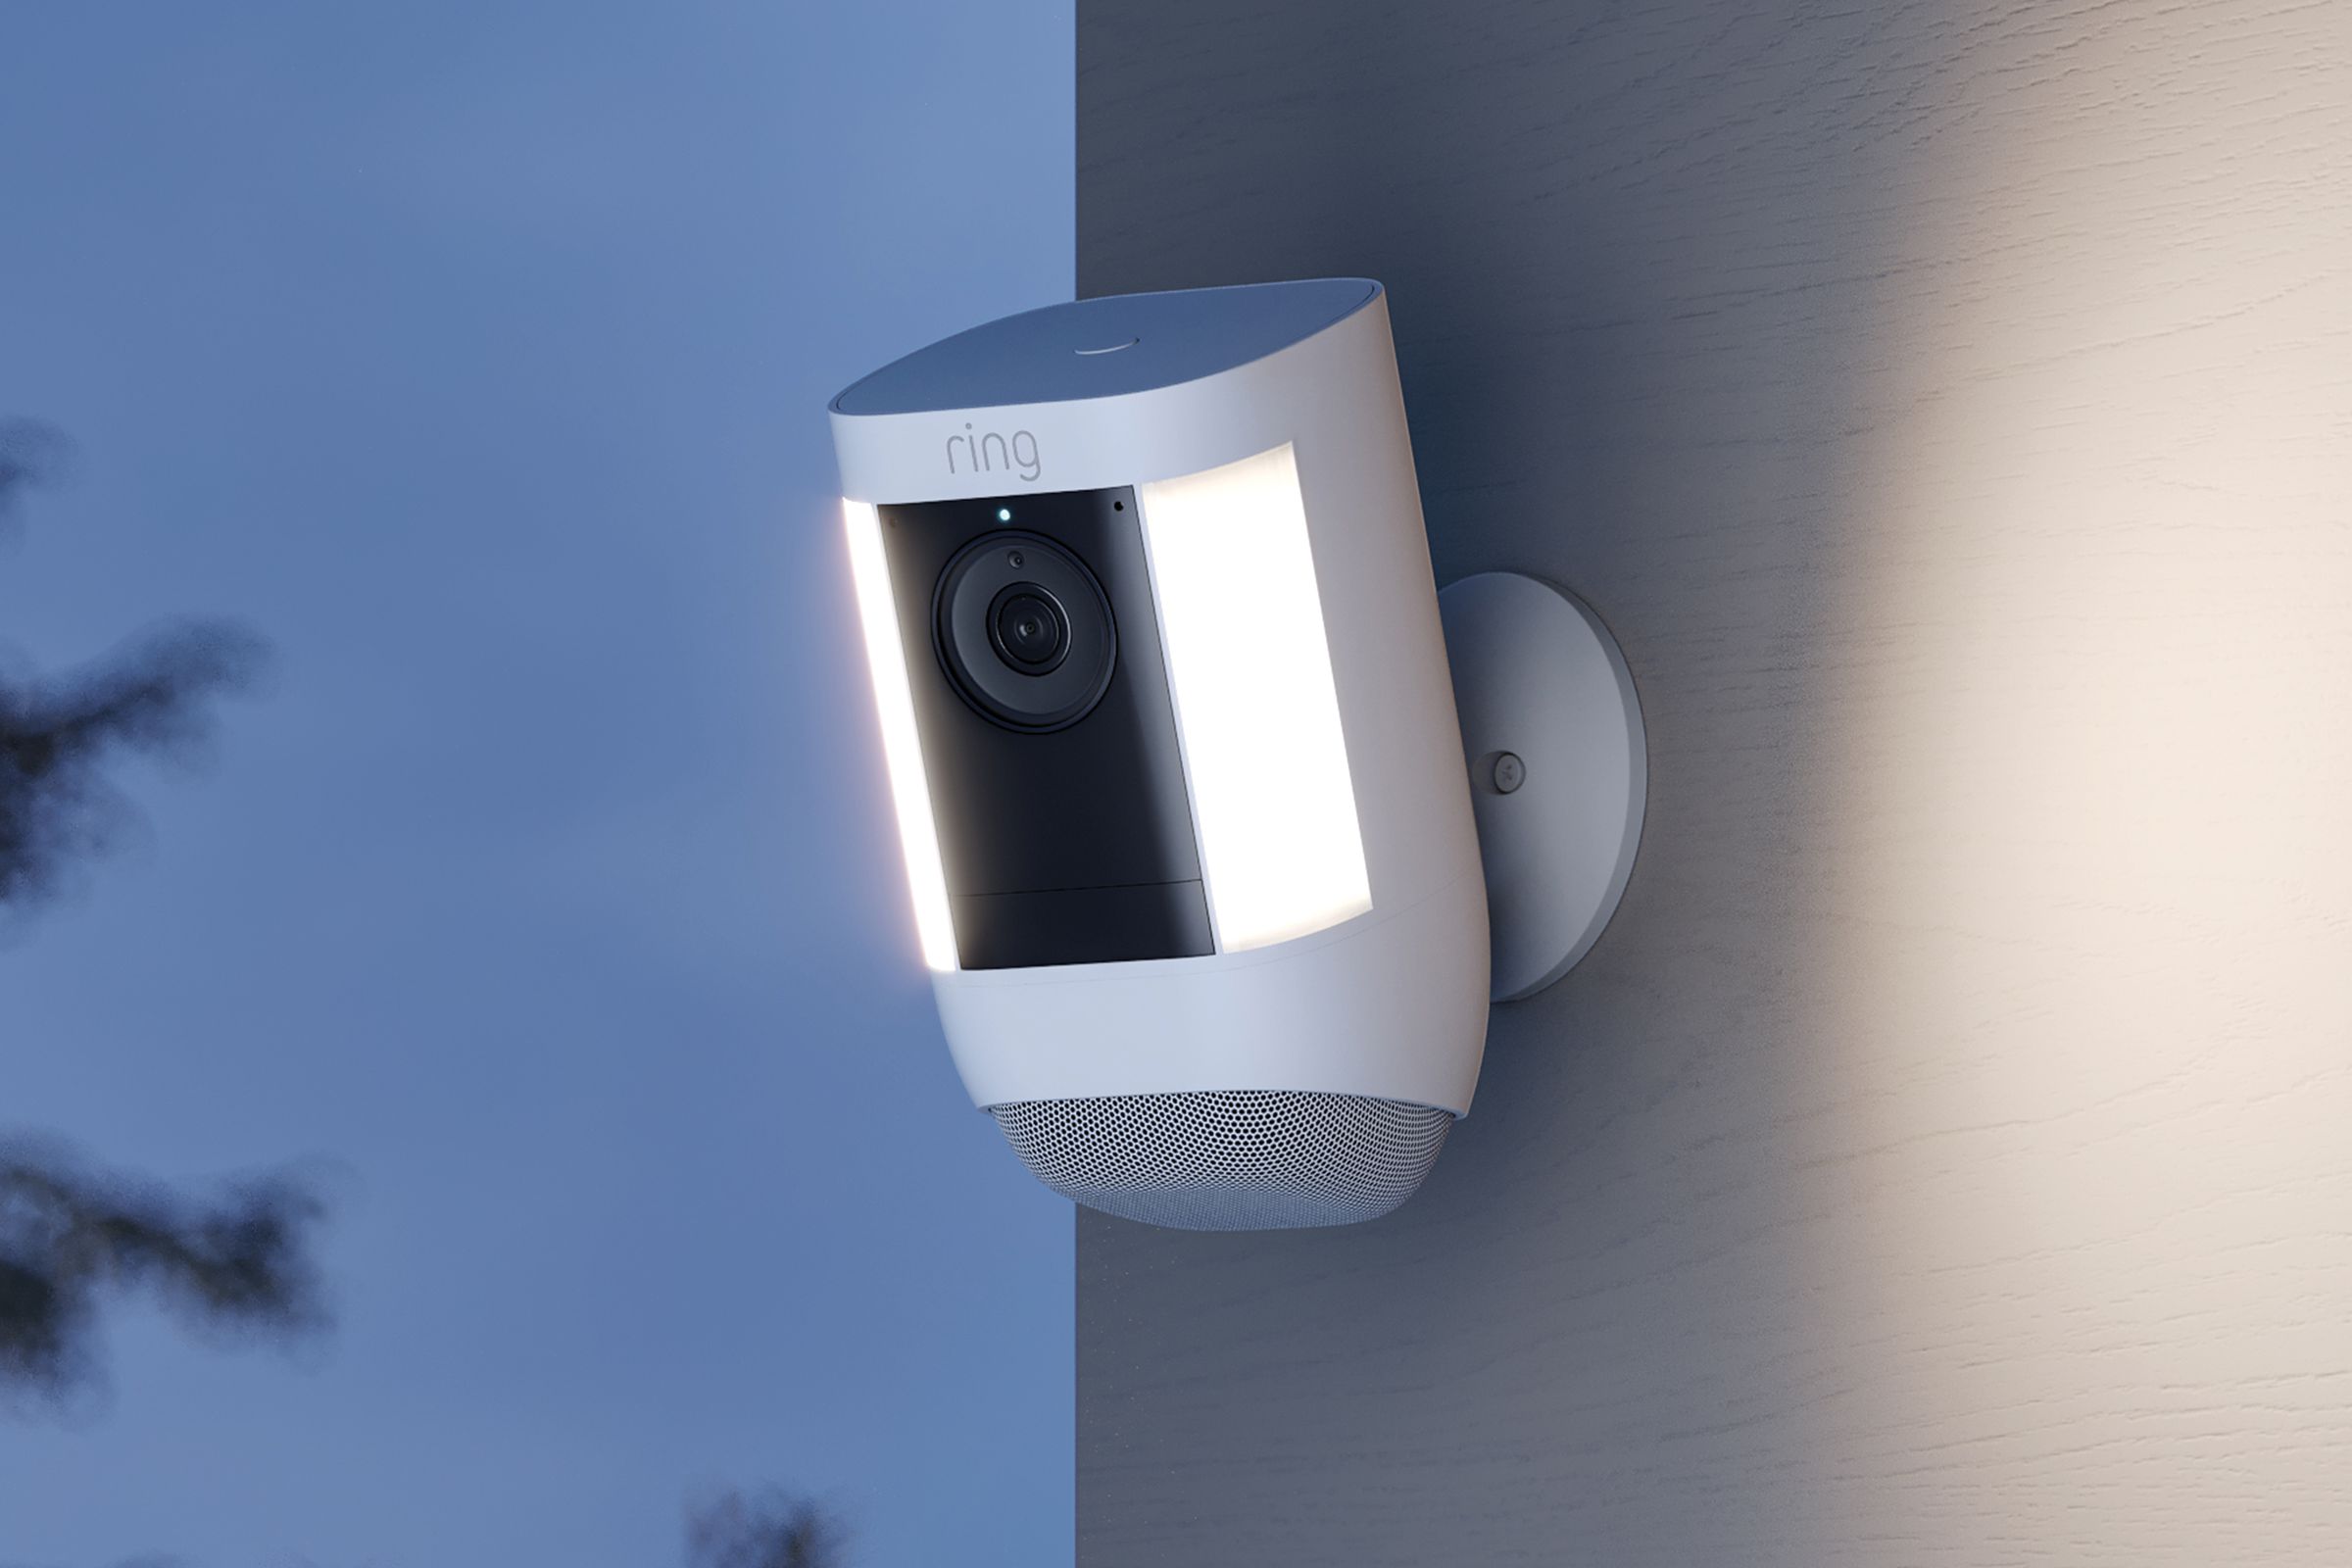 Ring’s spotlight camera is installed on an outdoor. Off the wall is a dark wooded background, and the camera has two lights on either side of its body on.